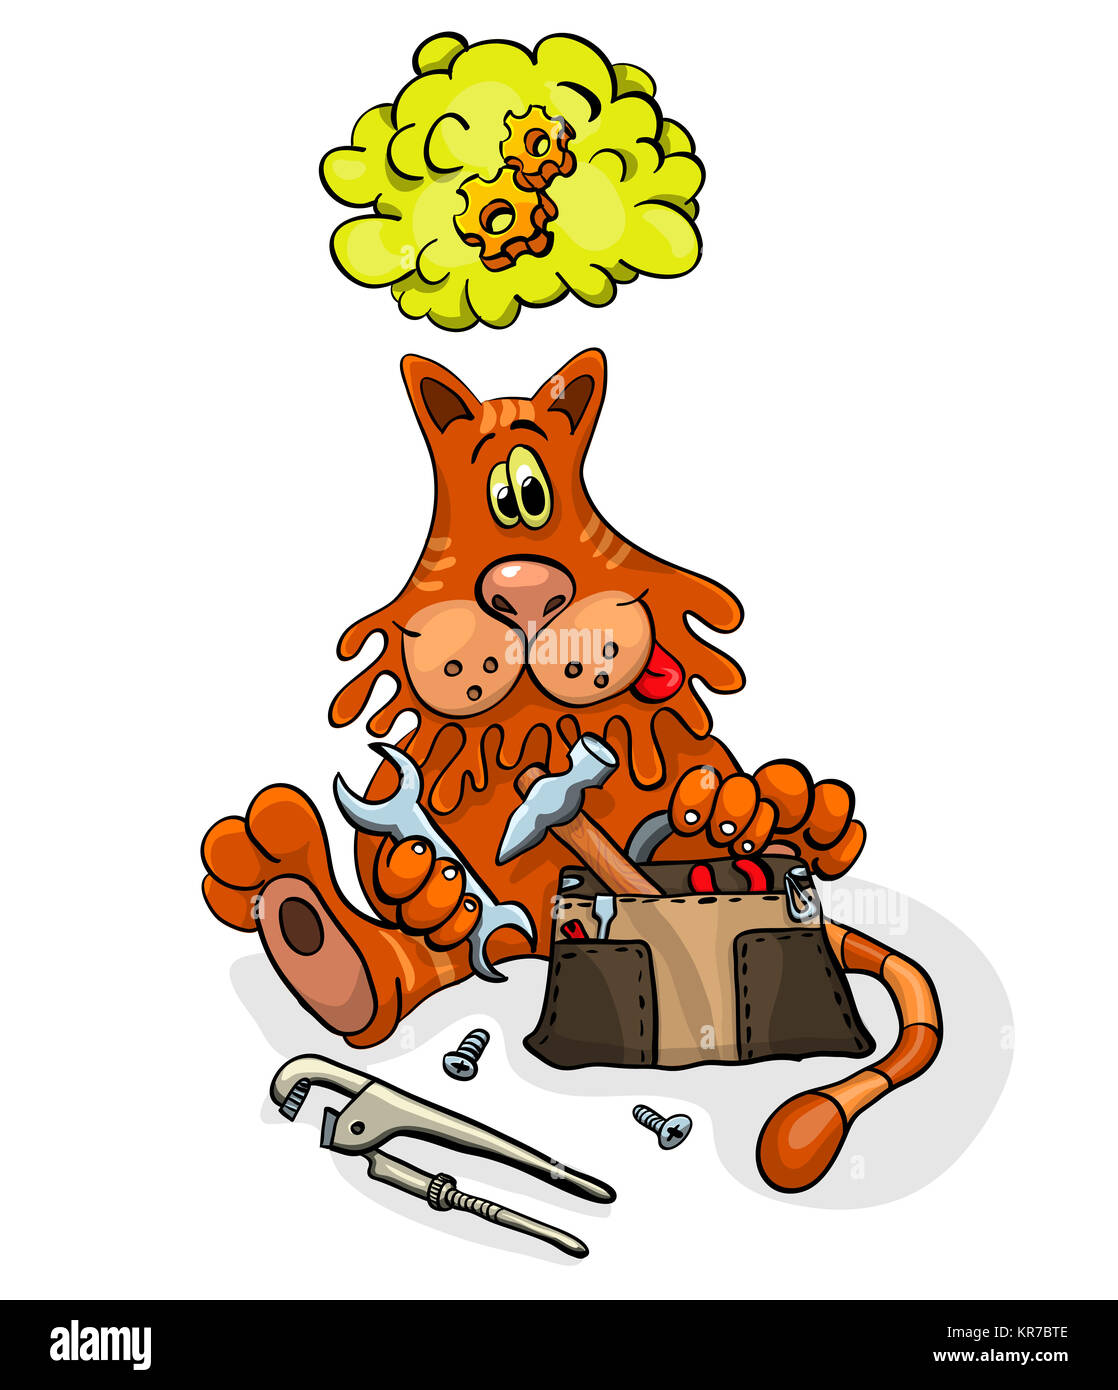 Cartoon character cat with tools for repair Stock Photo